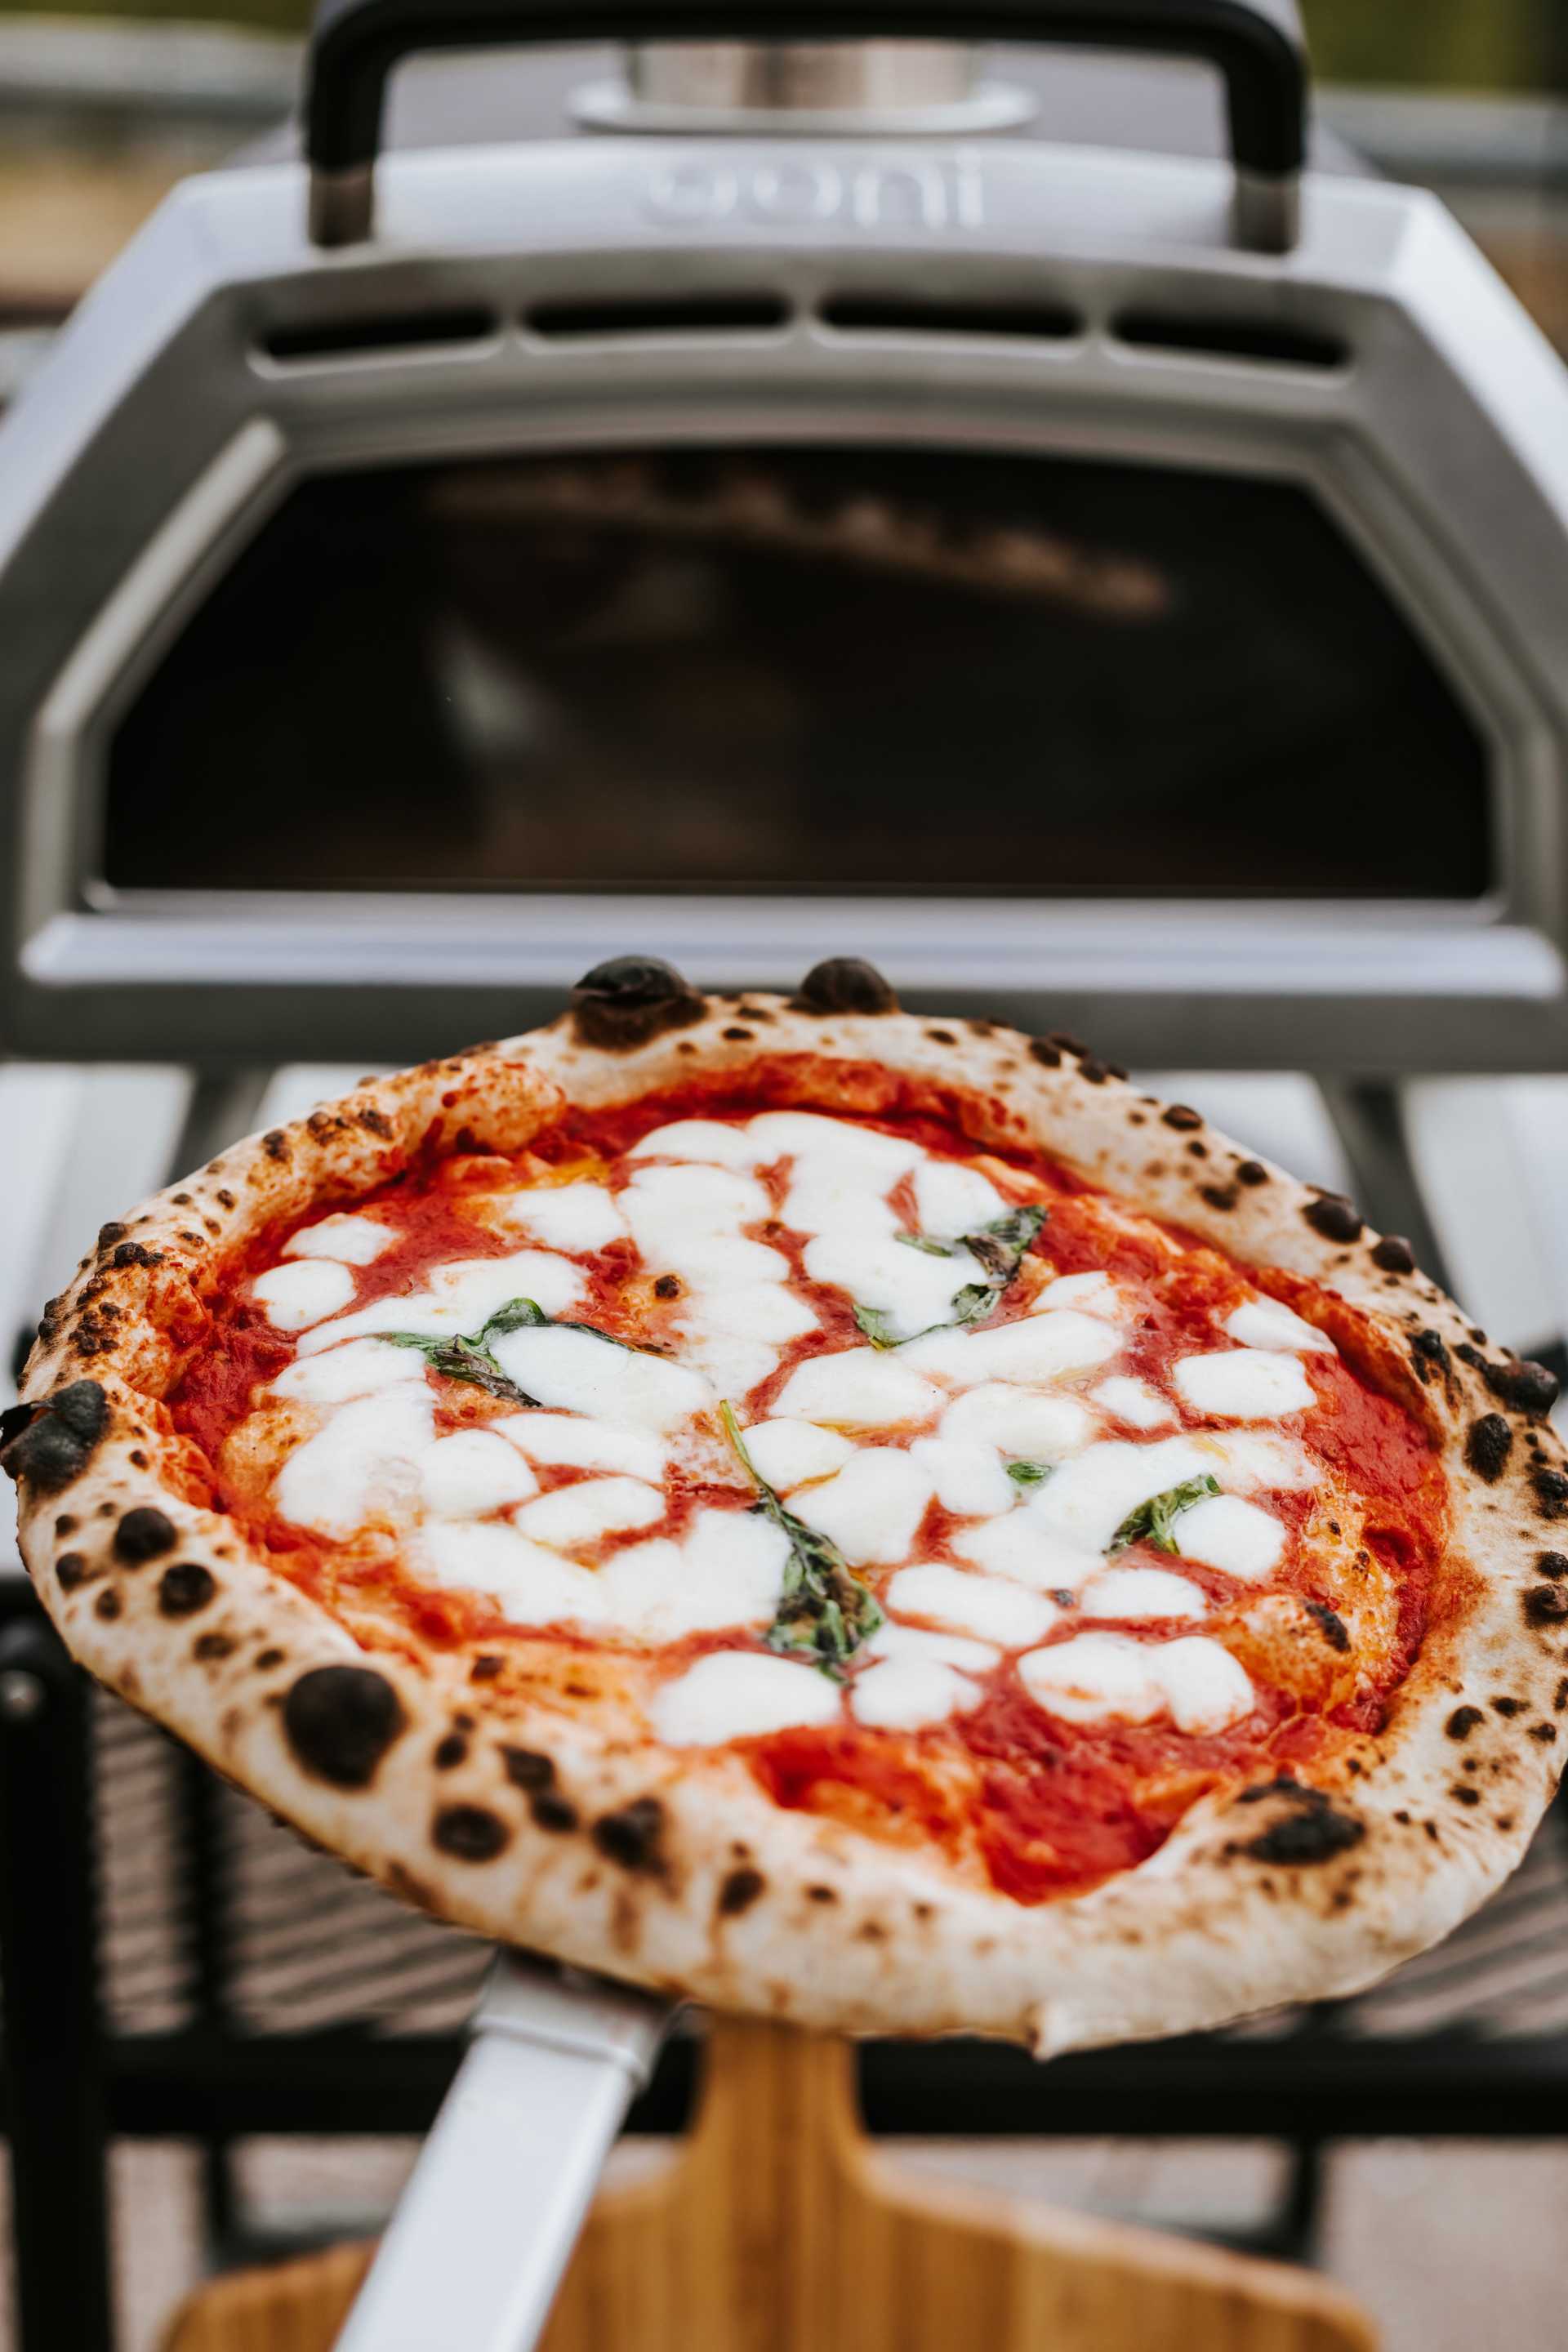 A margherita made with the Ooni Karu 16